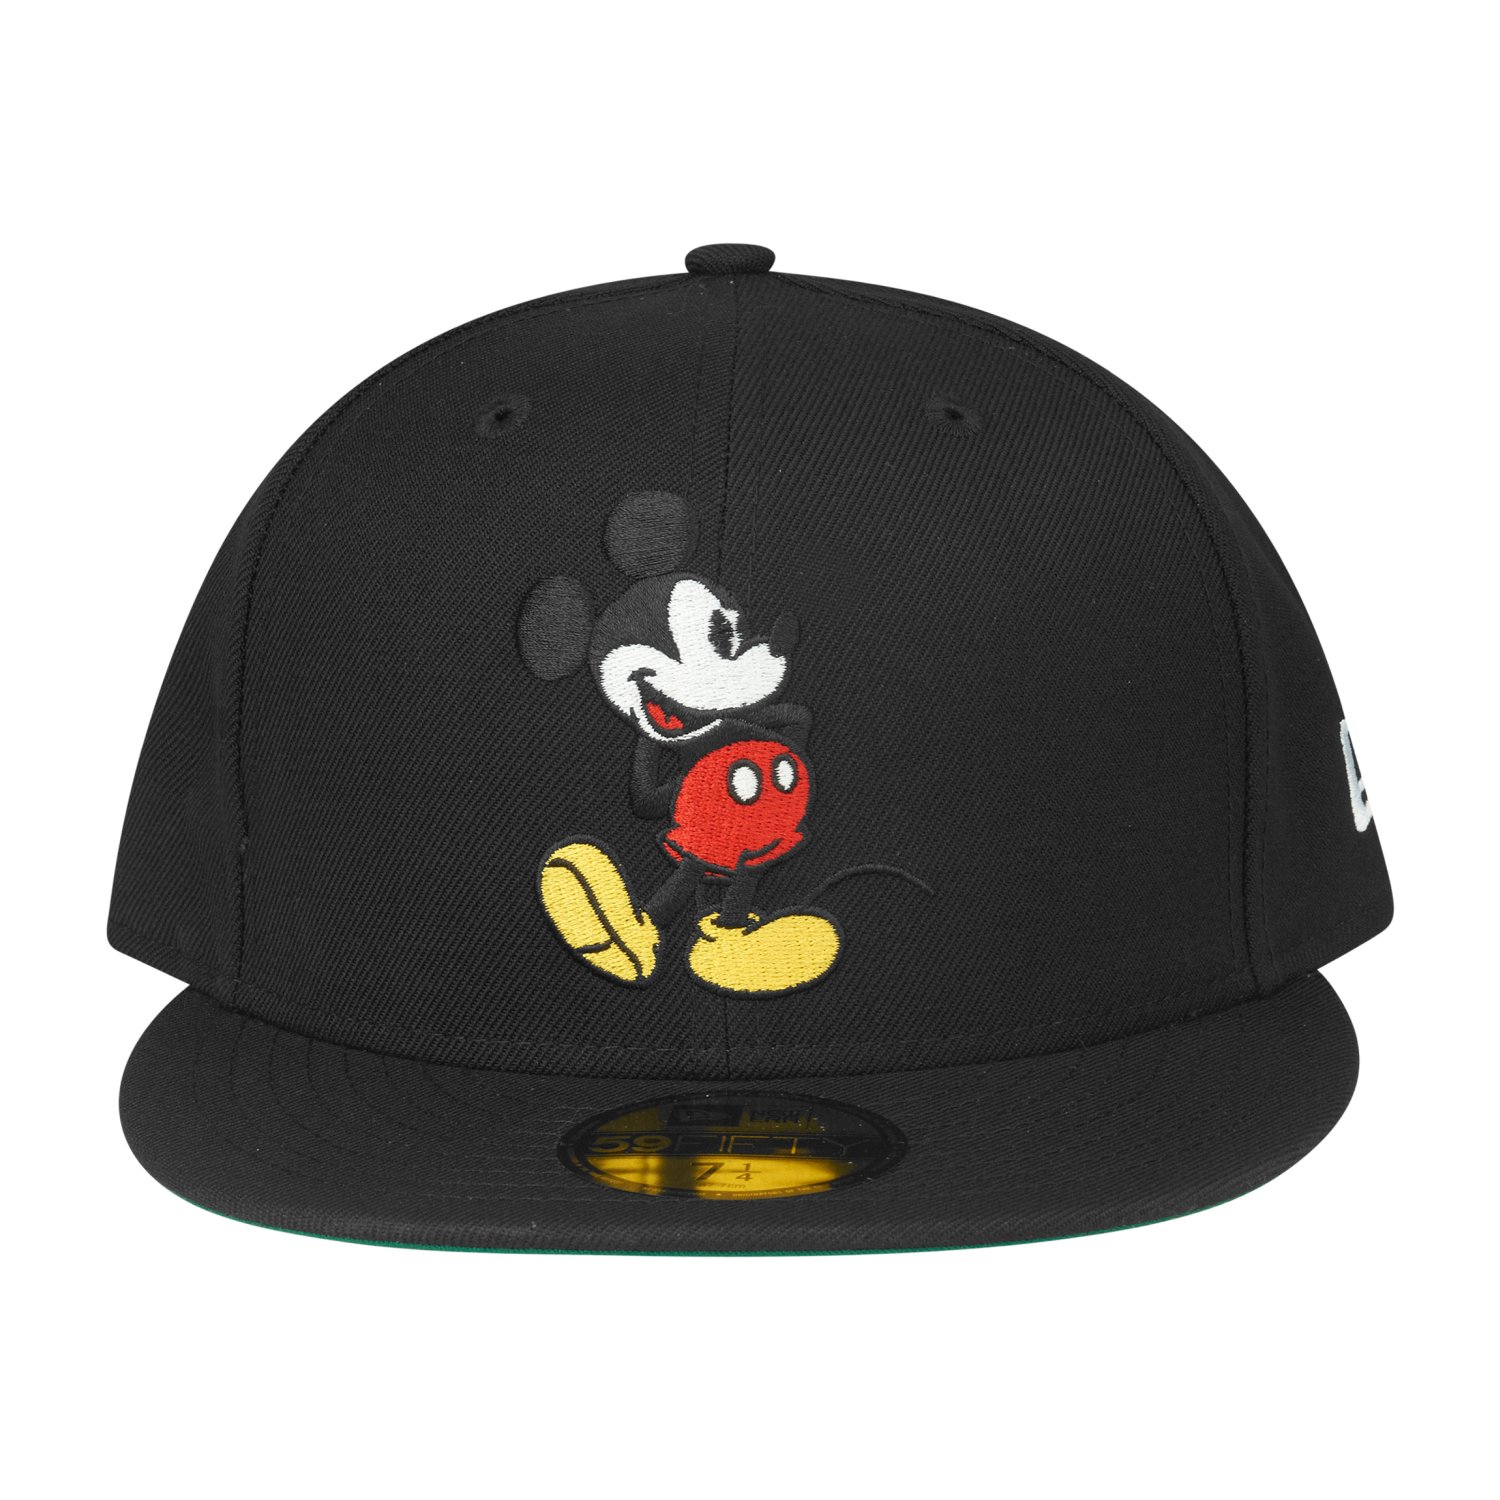 New Era 59Fifty Fitted Cap DISNEY Mickey Mouse schwarz